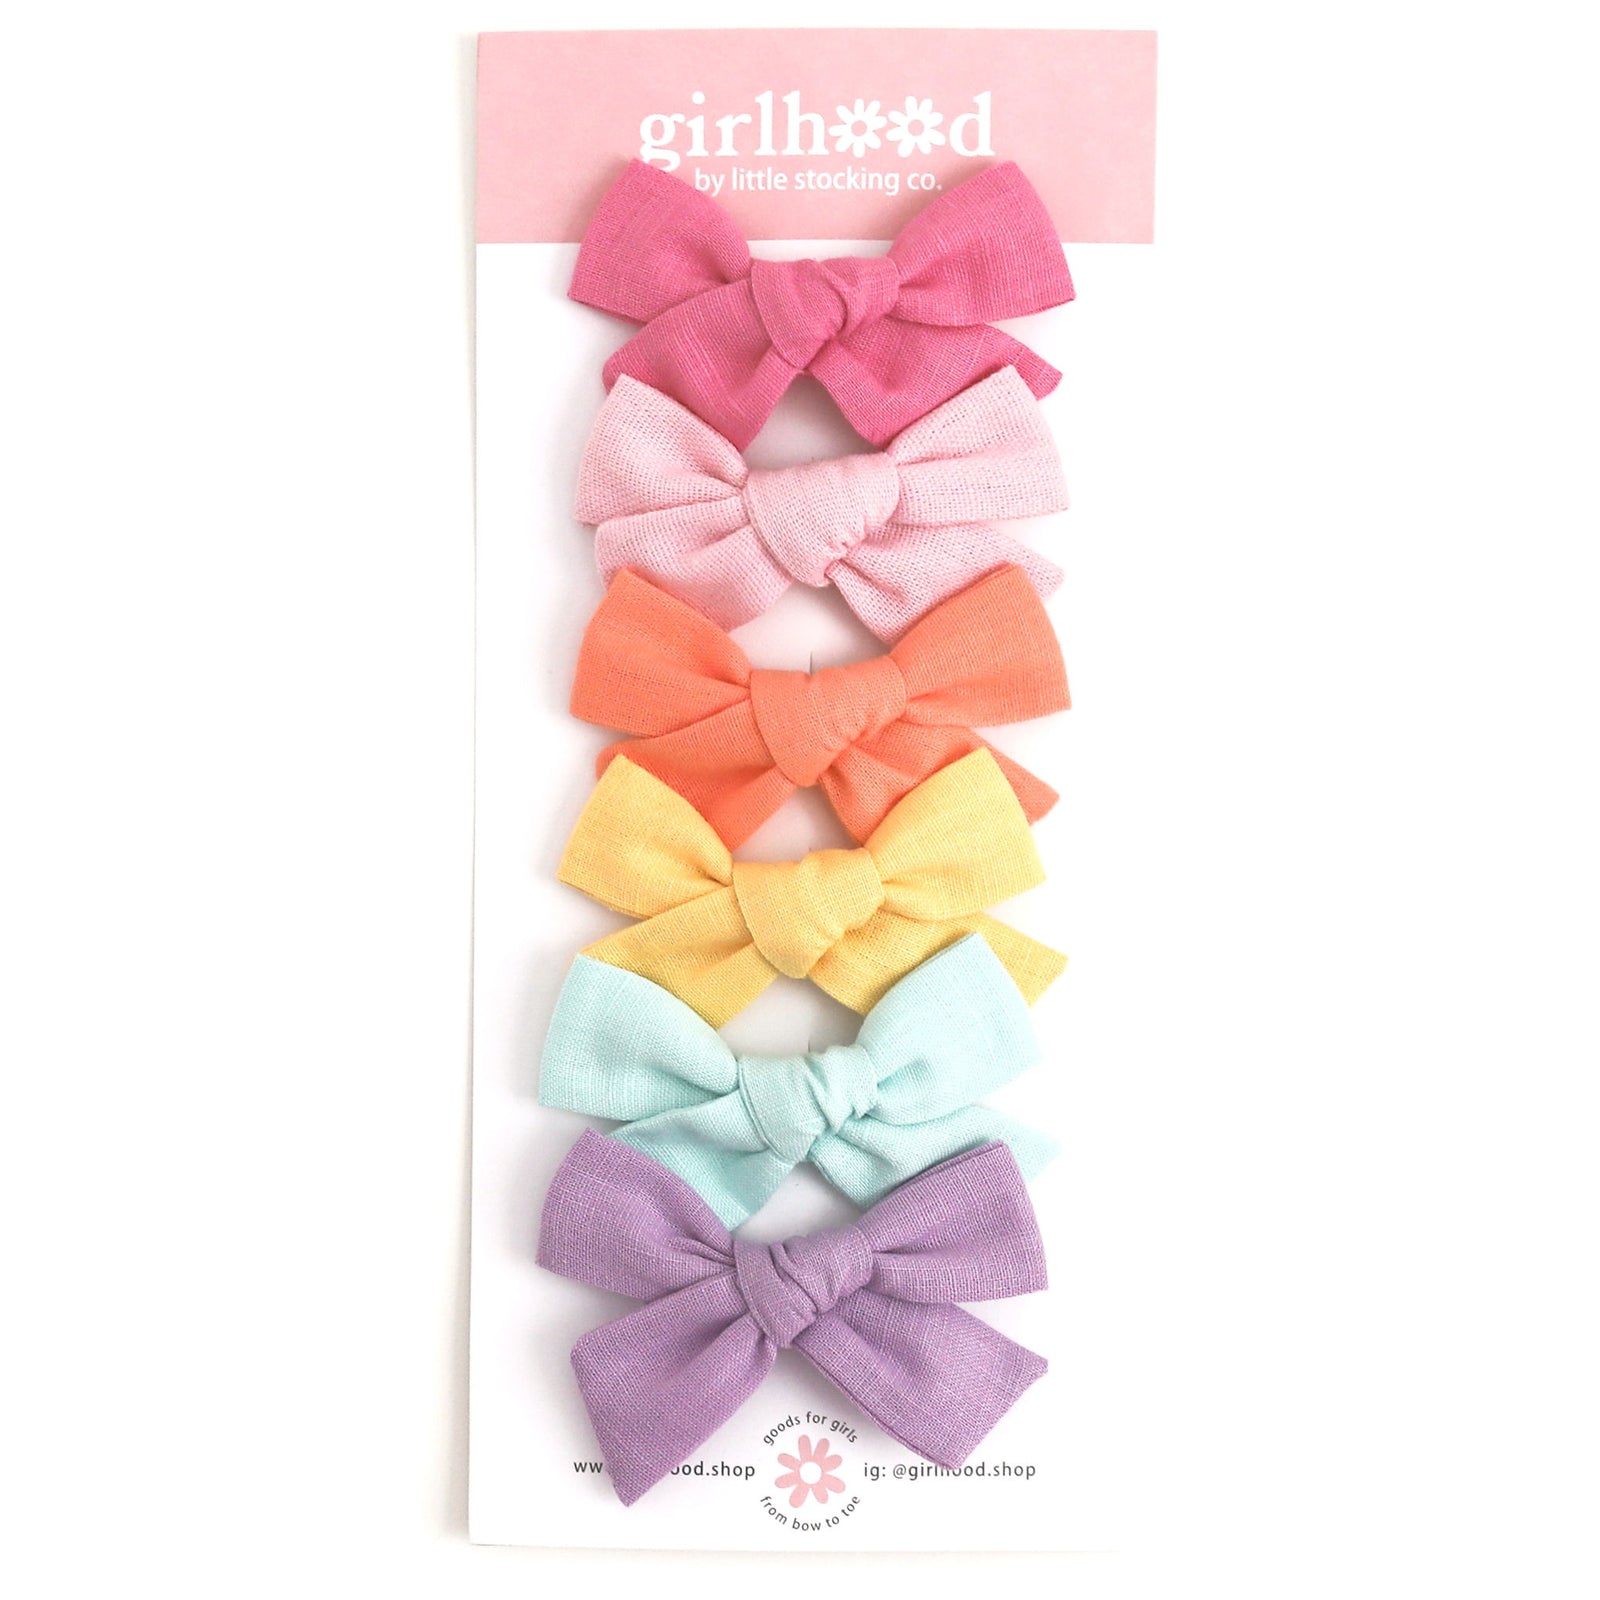 set of 6 3" clip bows in a rainbow of spring colors